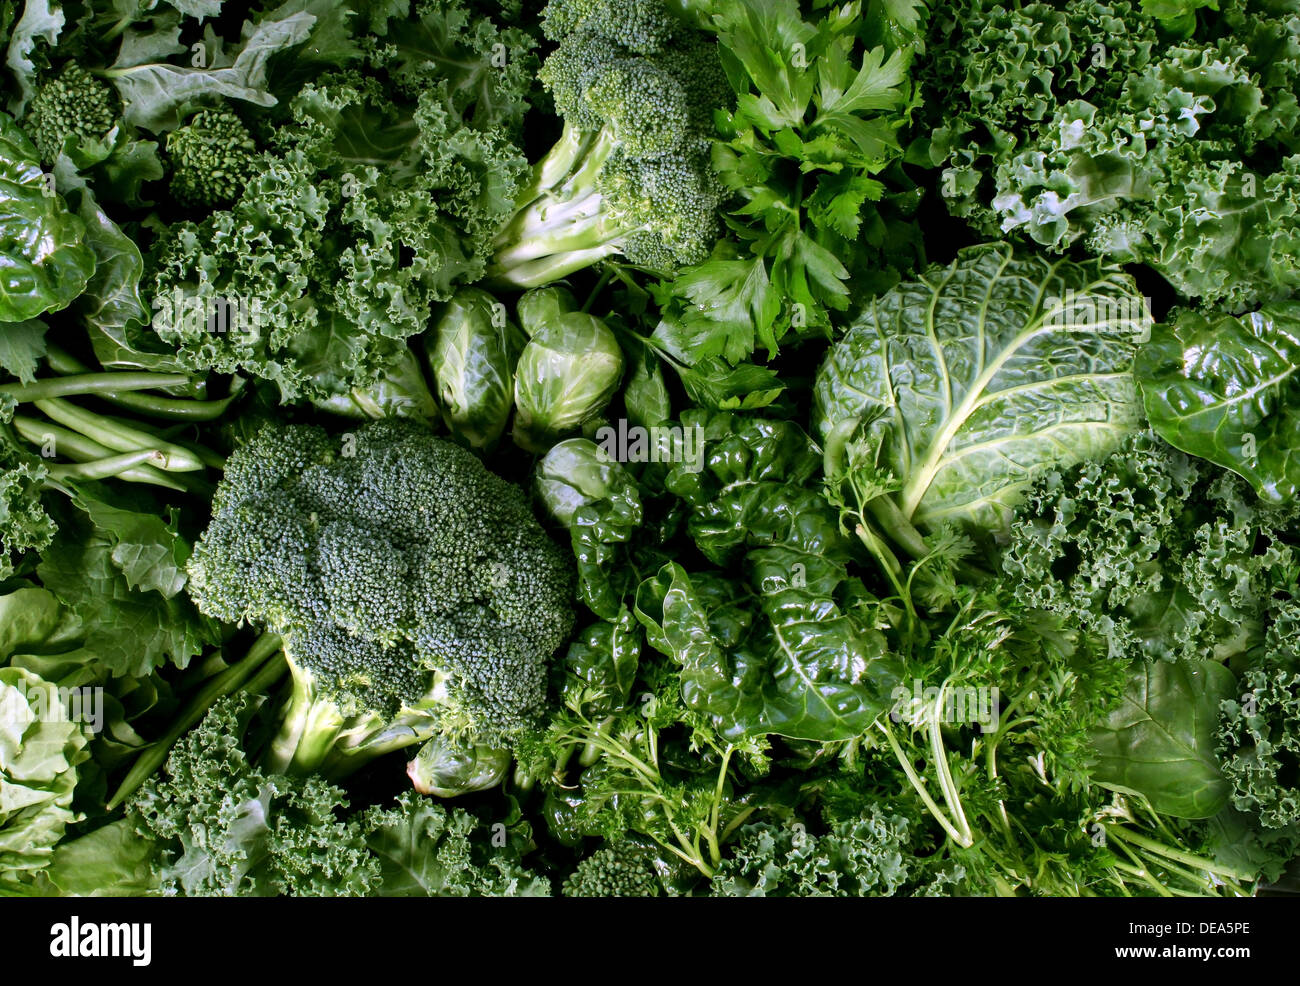 Green vegetables and dark leafy food background as a healthy eating concept of fresh garden produce organically grown as a symbol of health as kale swiss chard spinach collards broccoli and cabbage. Stock Photo